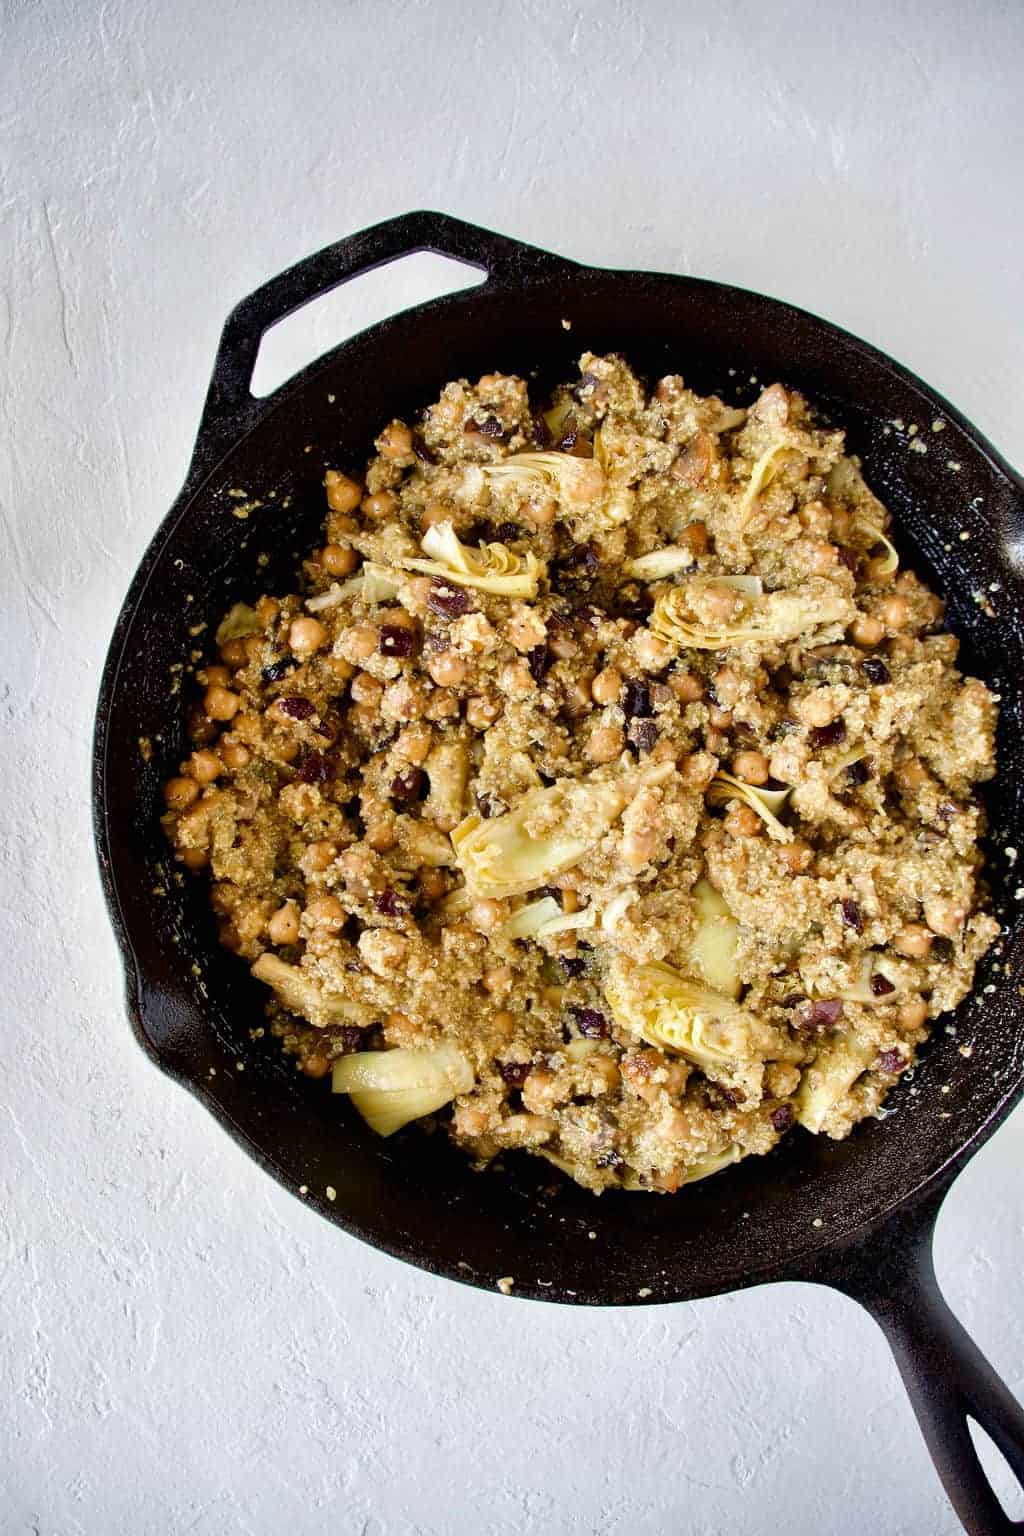 process of Artichoke Hearts Quinoa Salad being cooked in a cast iron skillet against white background